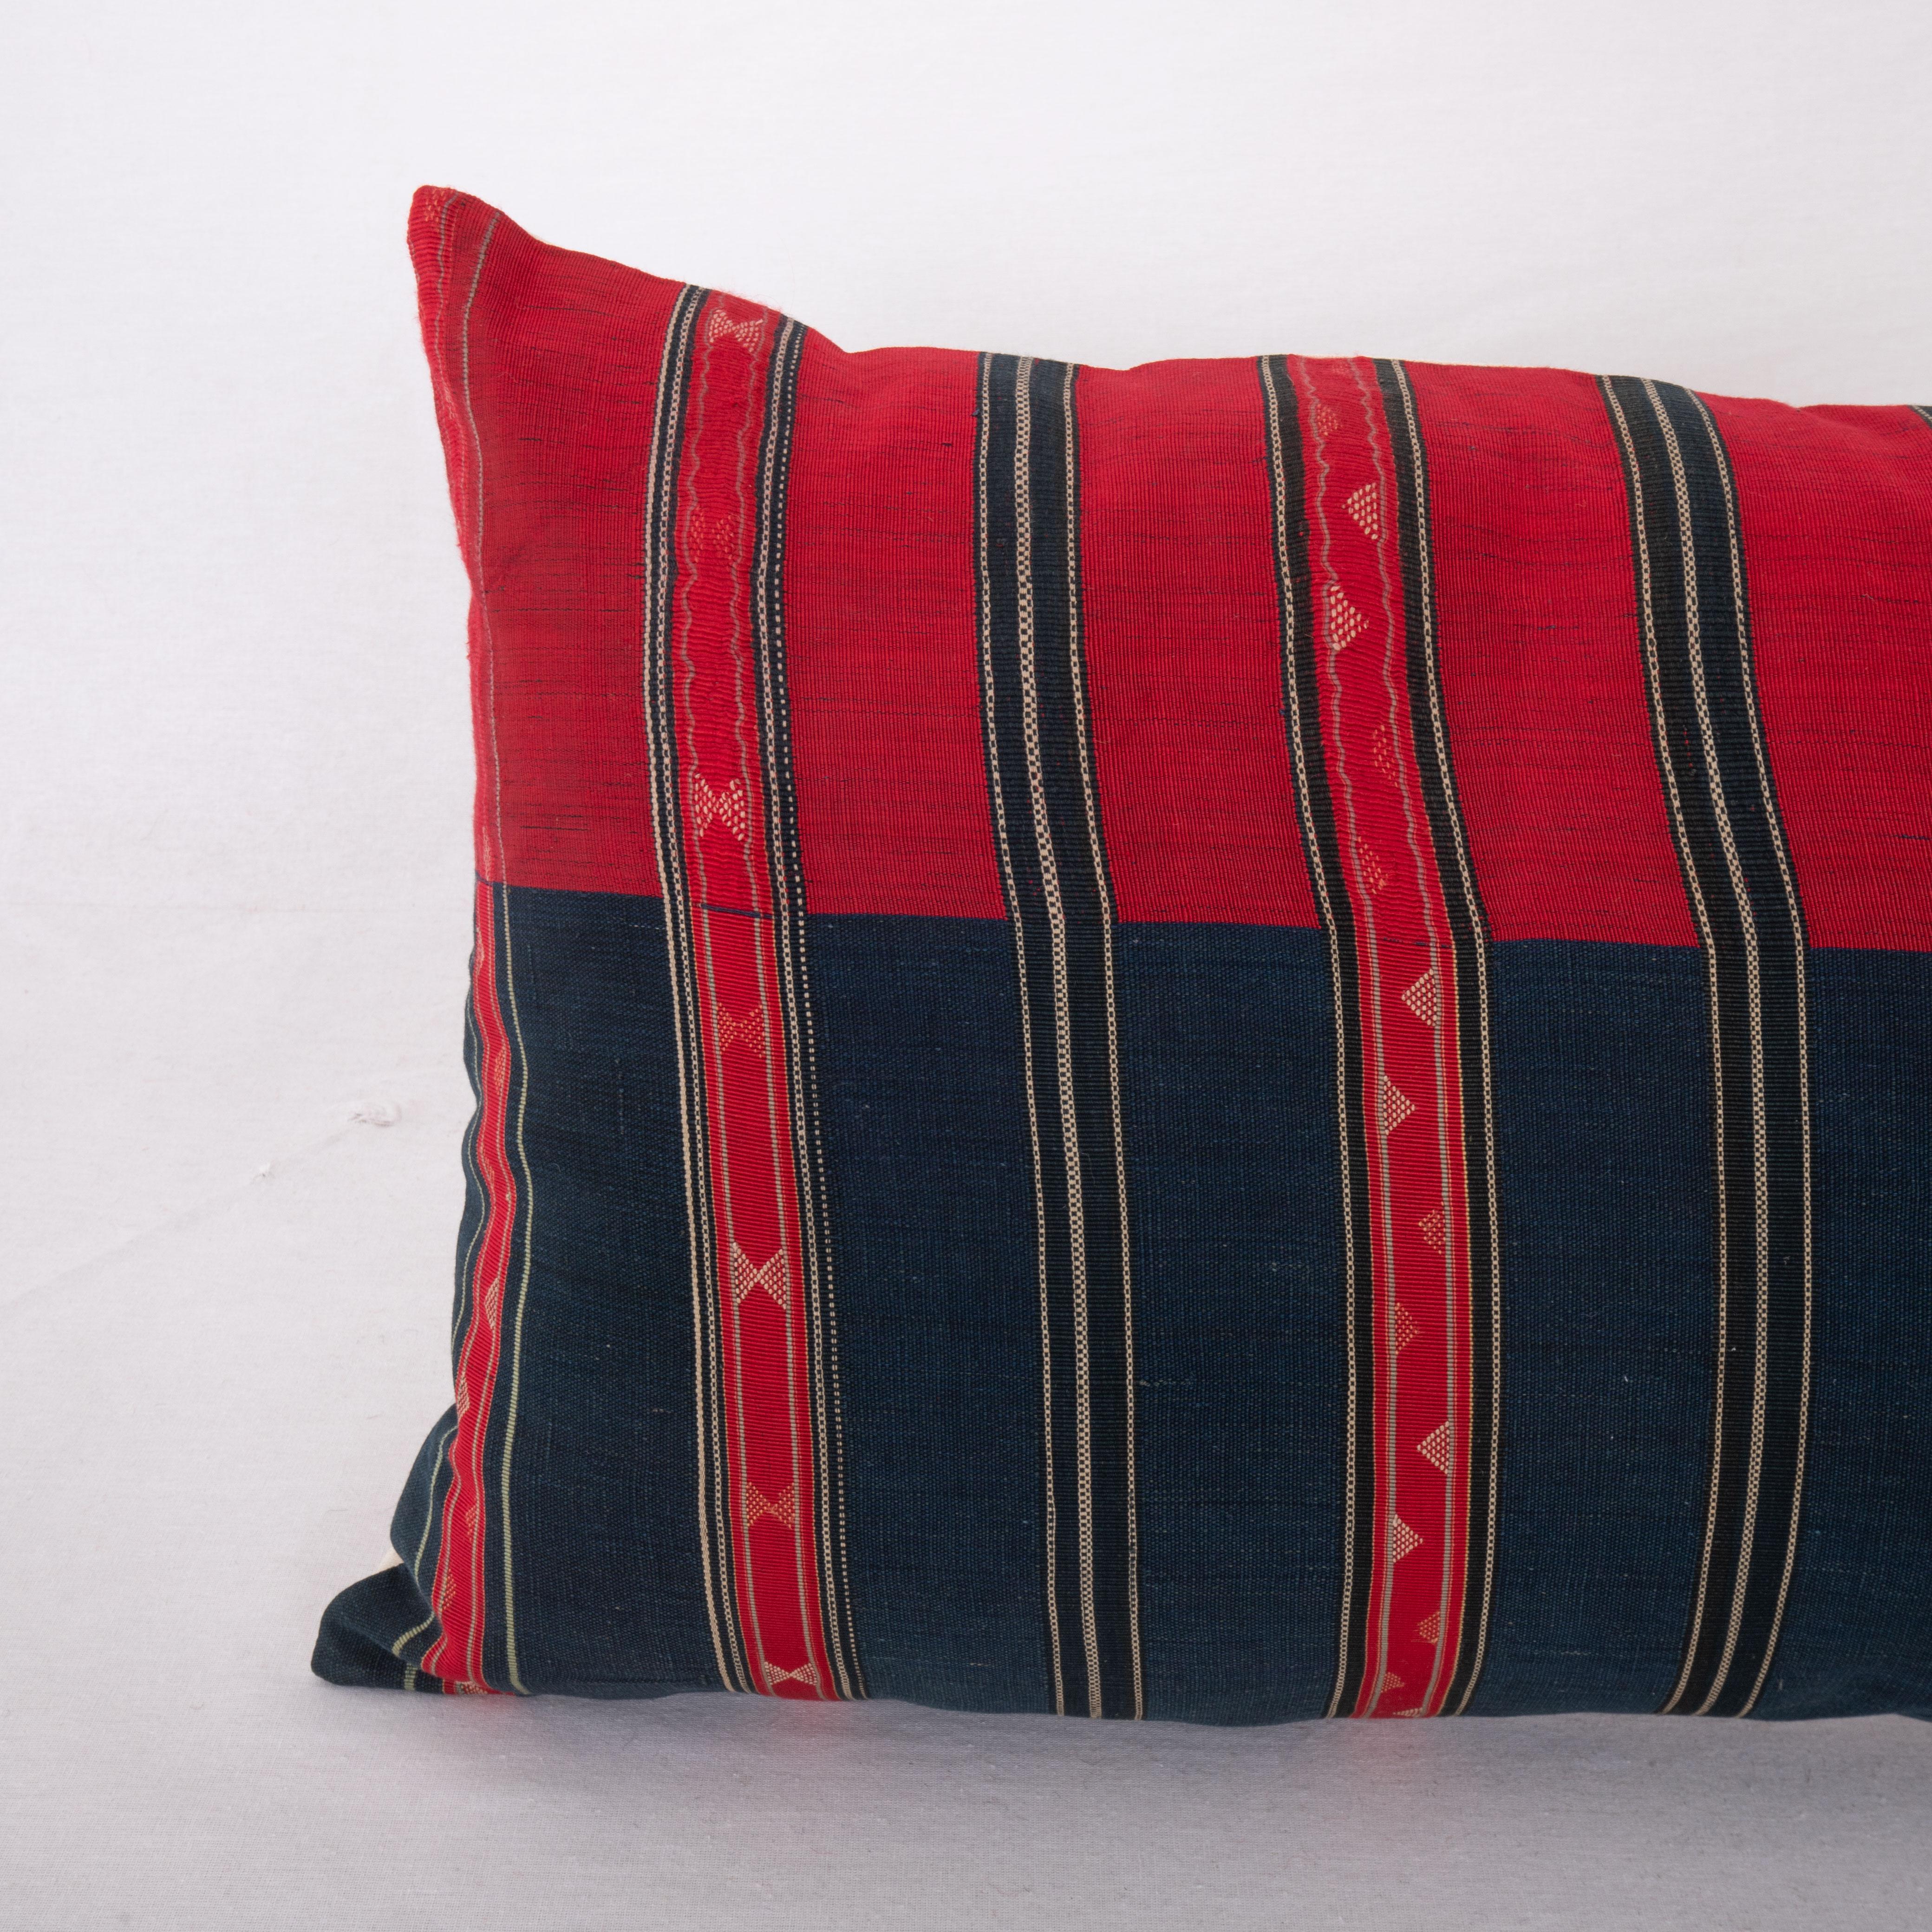 Tribal Antique Silk and Cotton Waziri Shawl Pillow Cover, Afghanistan, Early 20th C